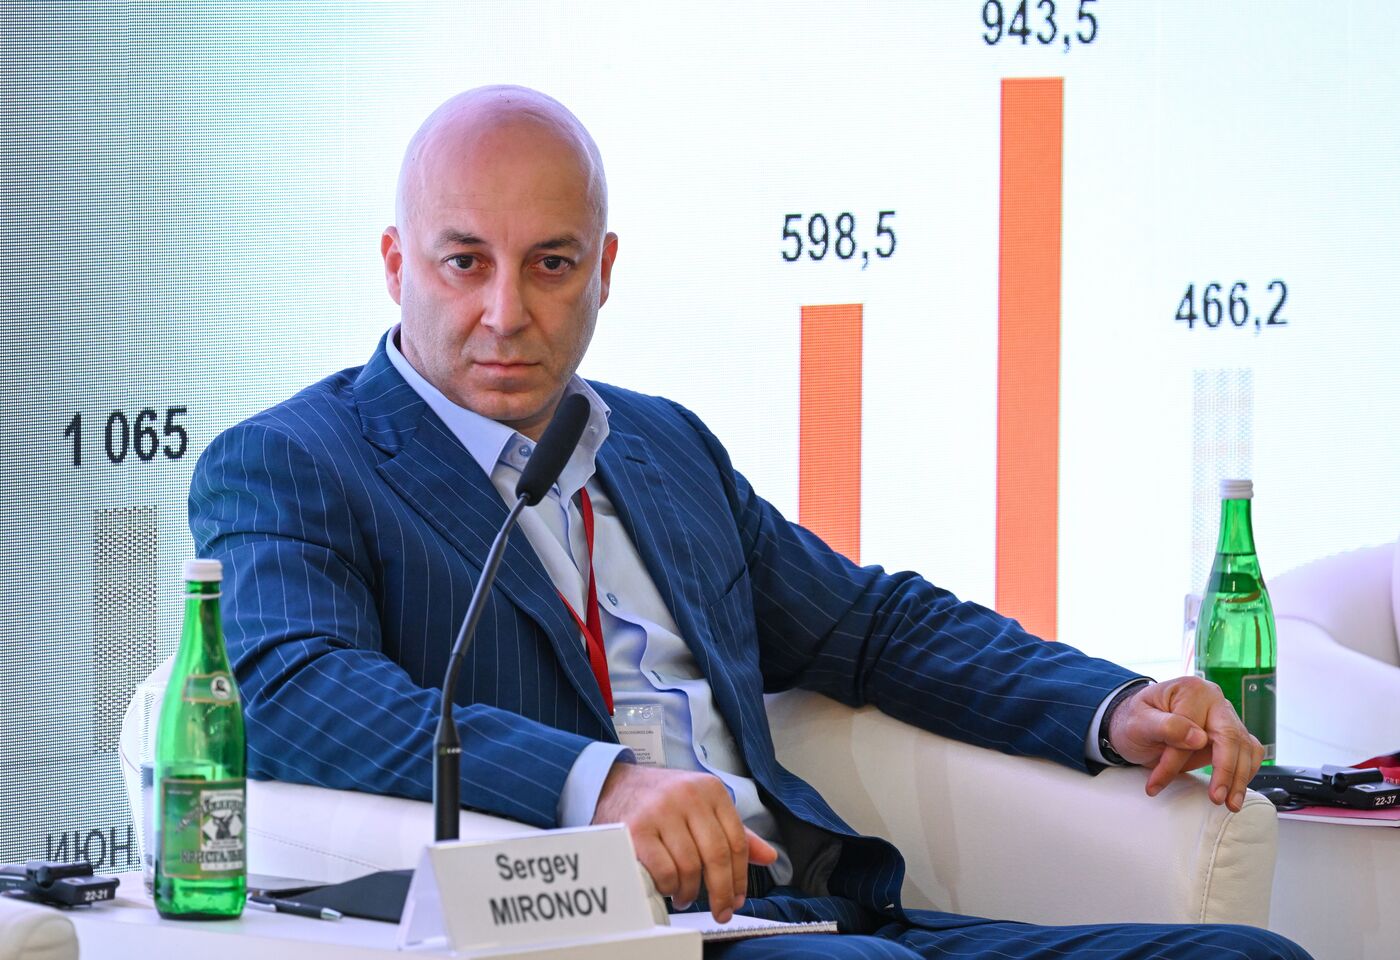 SPIEF-2023. Concerted Action: Configuring the Tax System Through Feedback